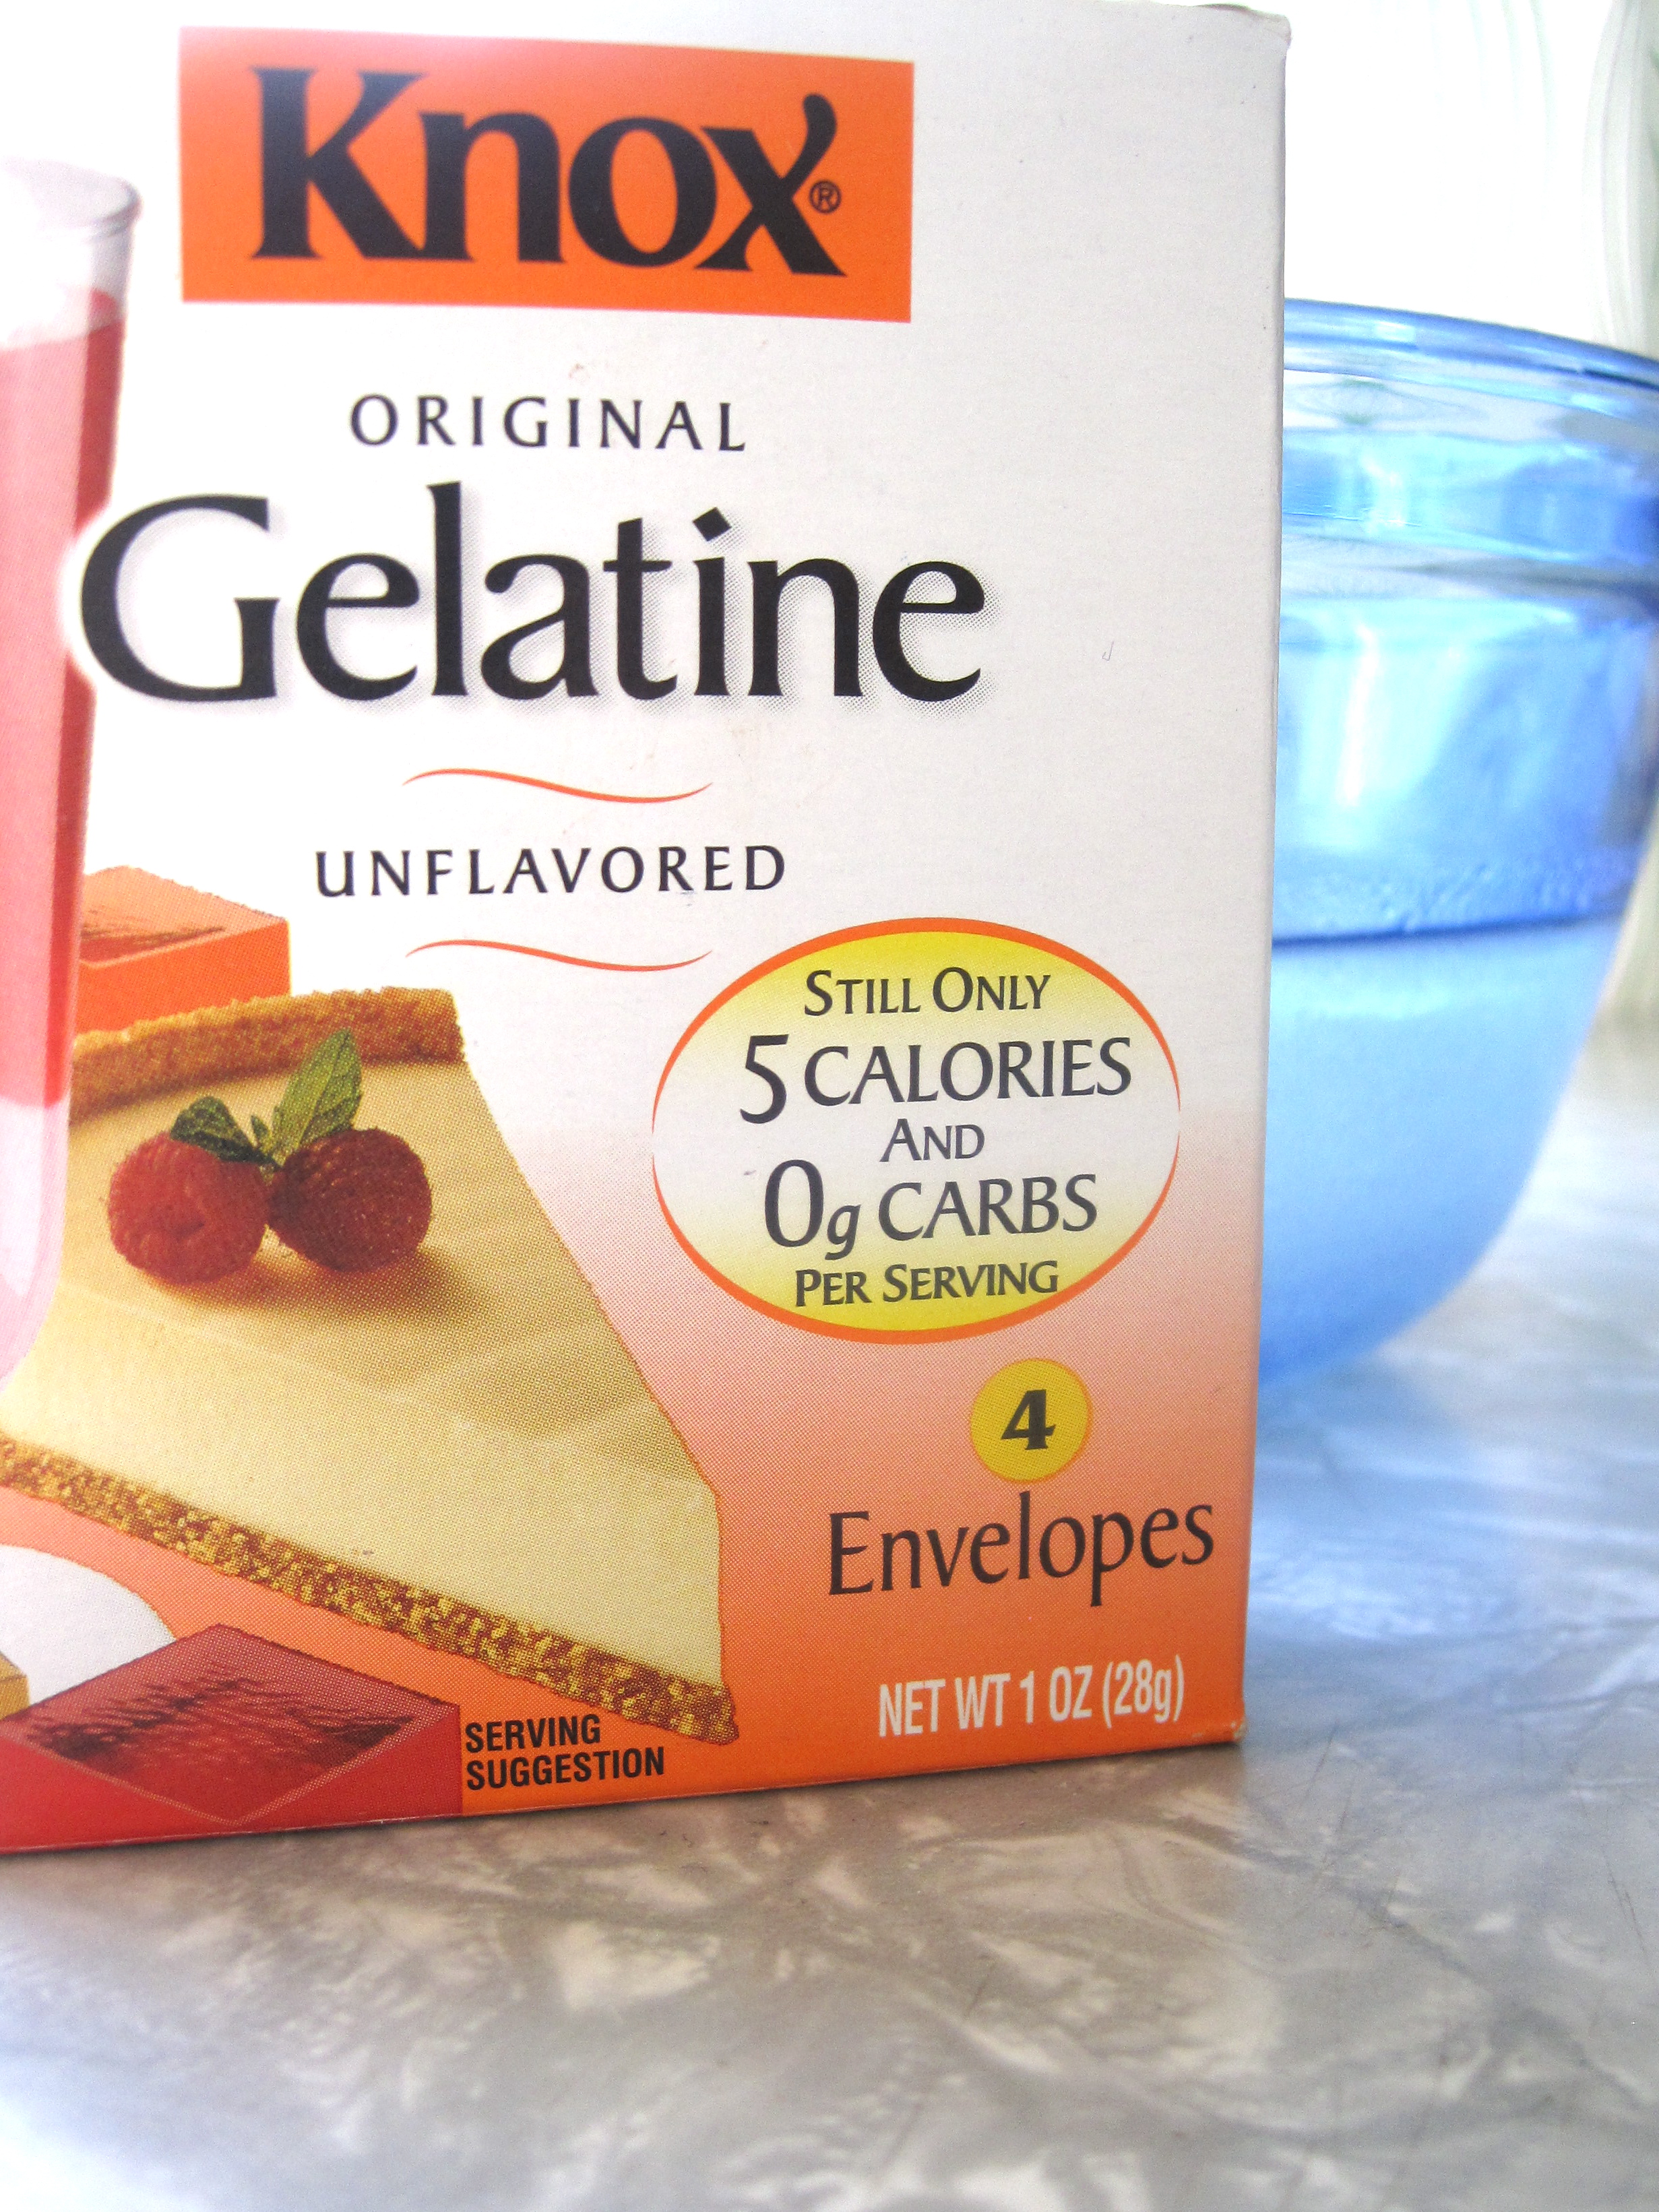 What is Gelatine and Where to Buy Gelatine